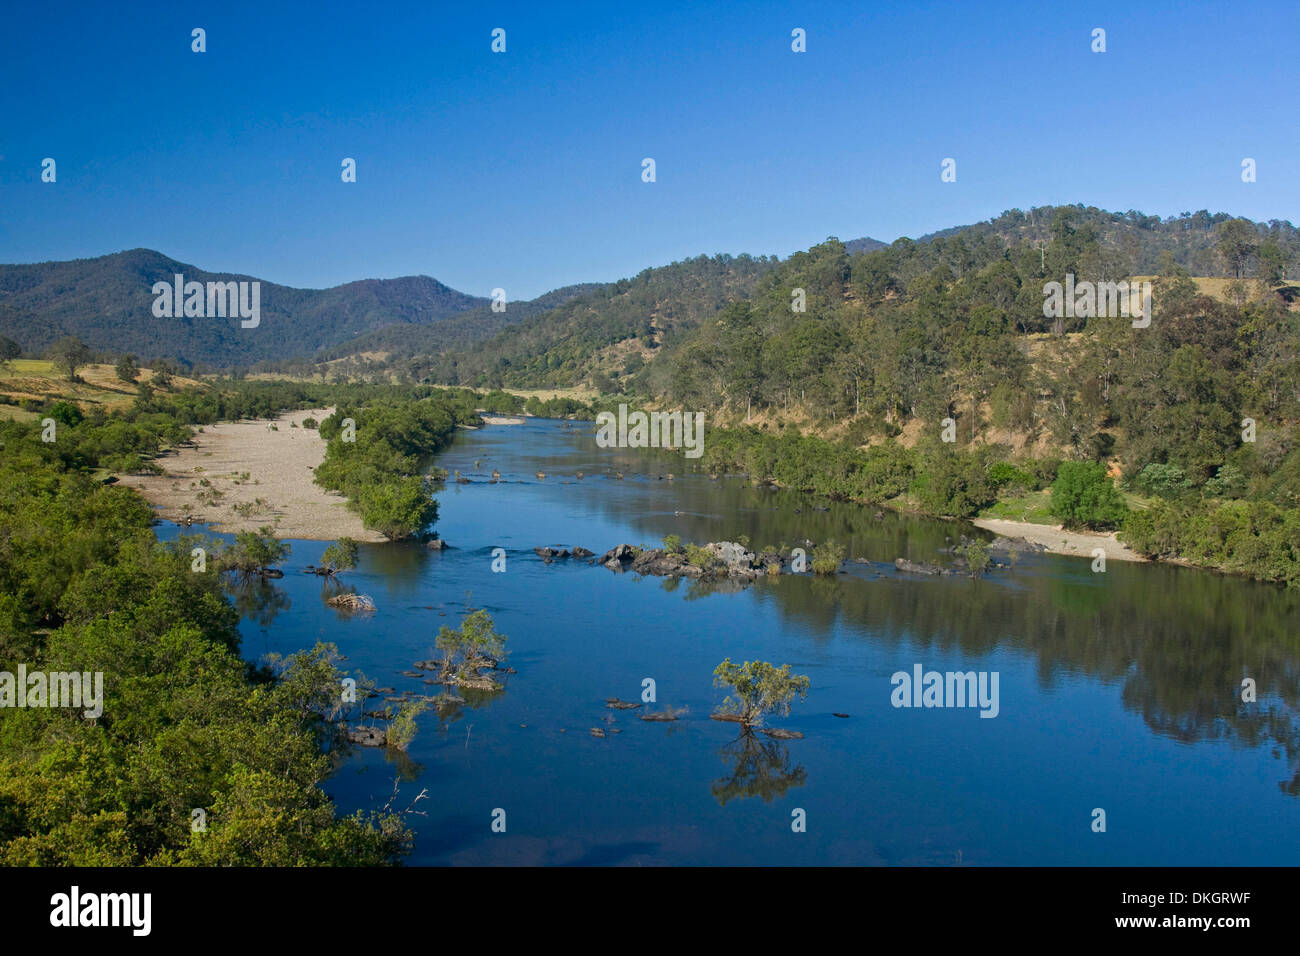 Mann River and landscape at Jackadgery, NSW Stock Photo